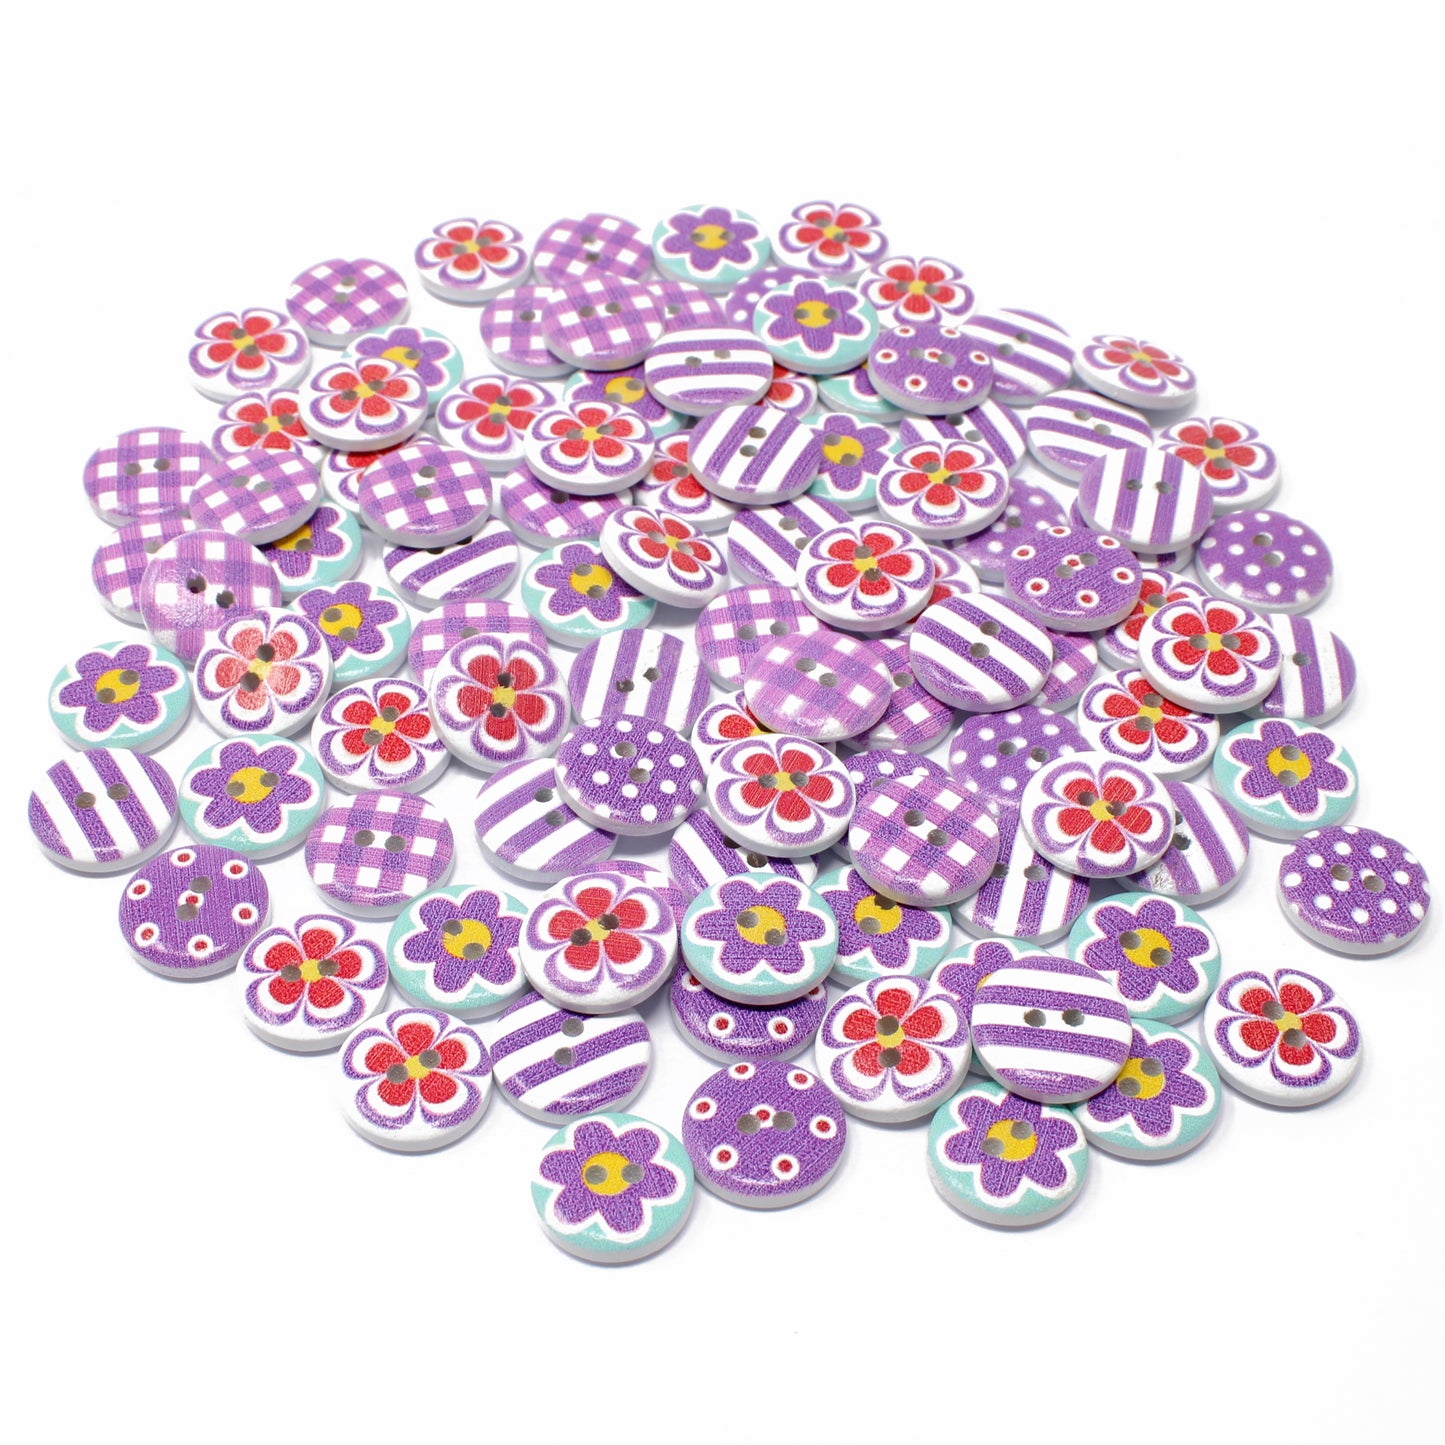 Purple Mix 100 Mixed 15mm Round Wooden Craft Buttons